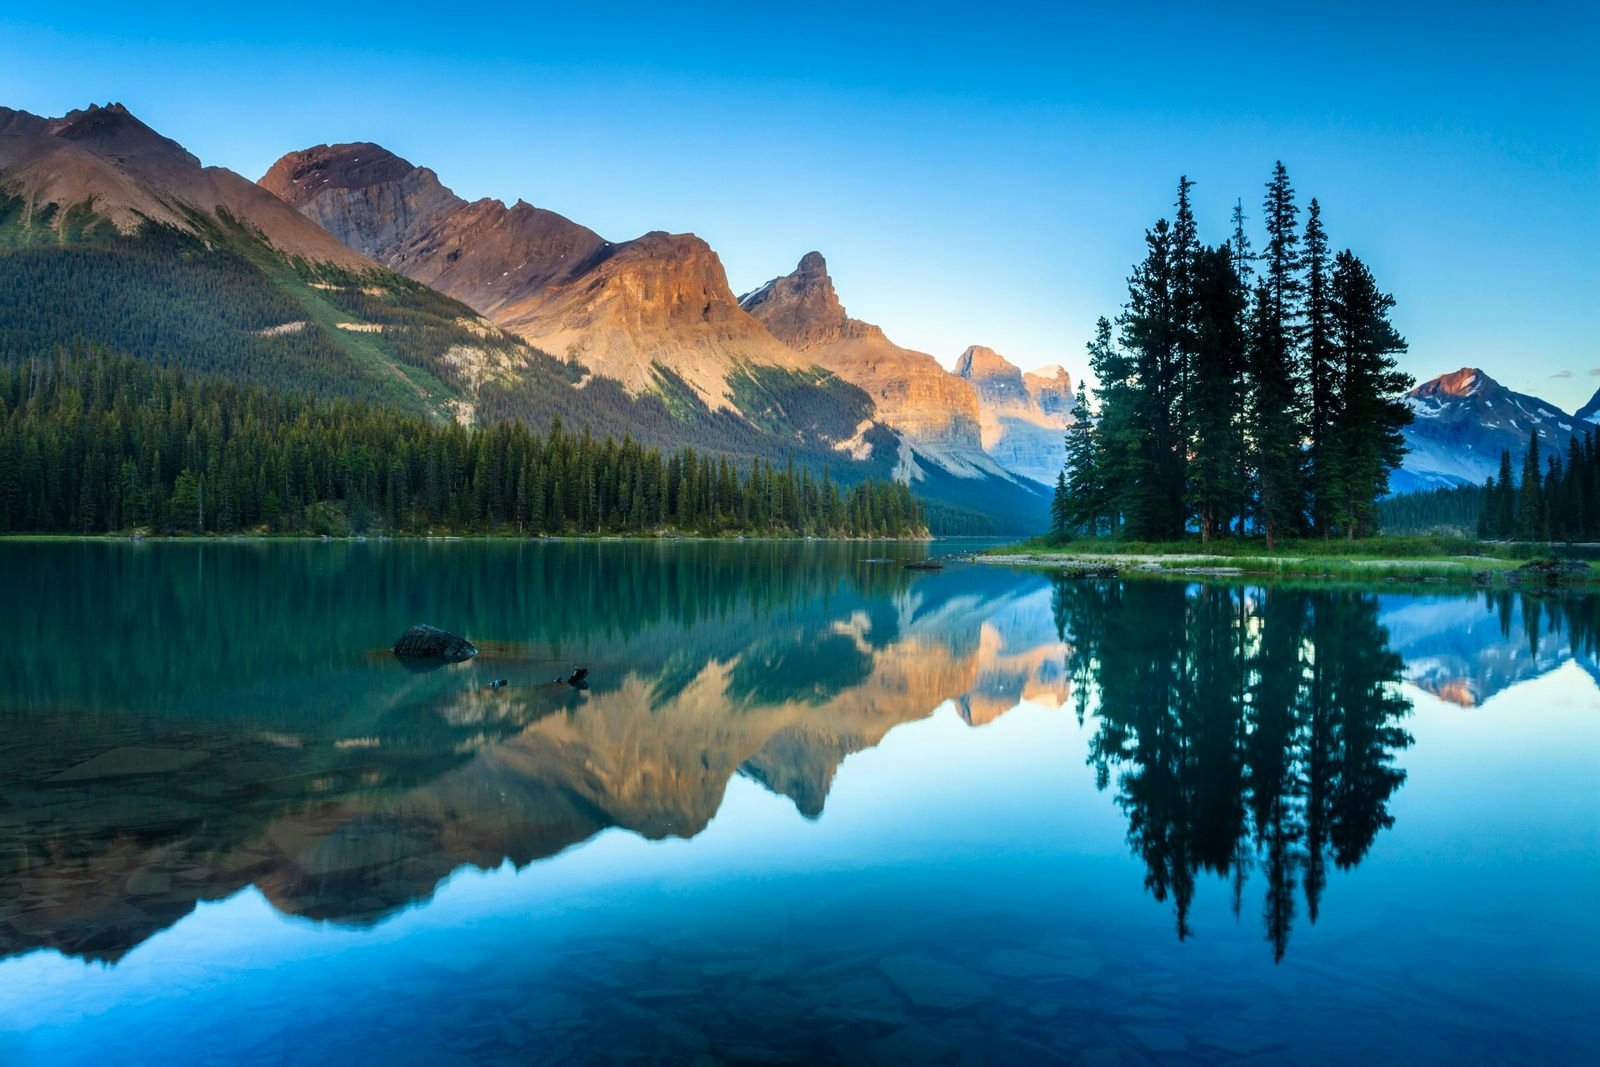 View of mountains and trees reflected in a still lake